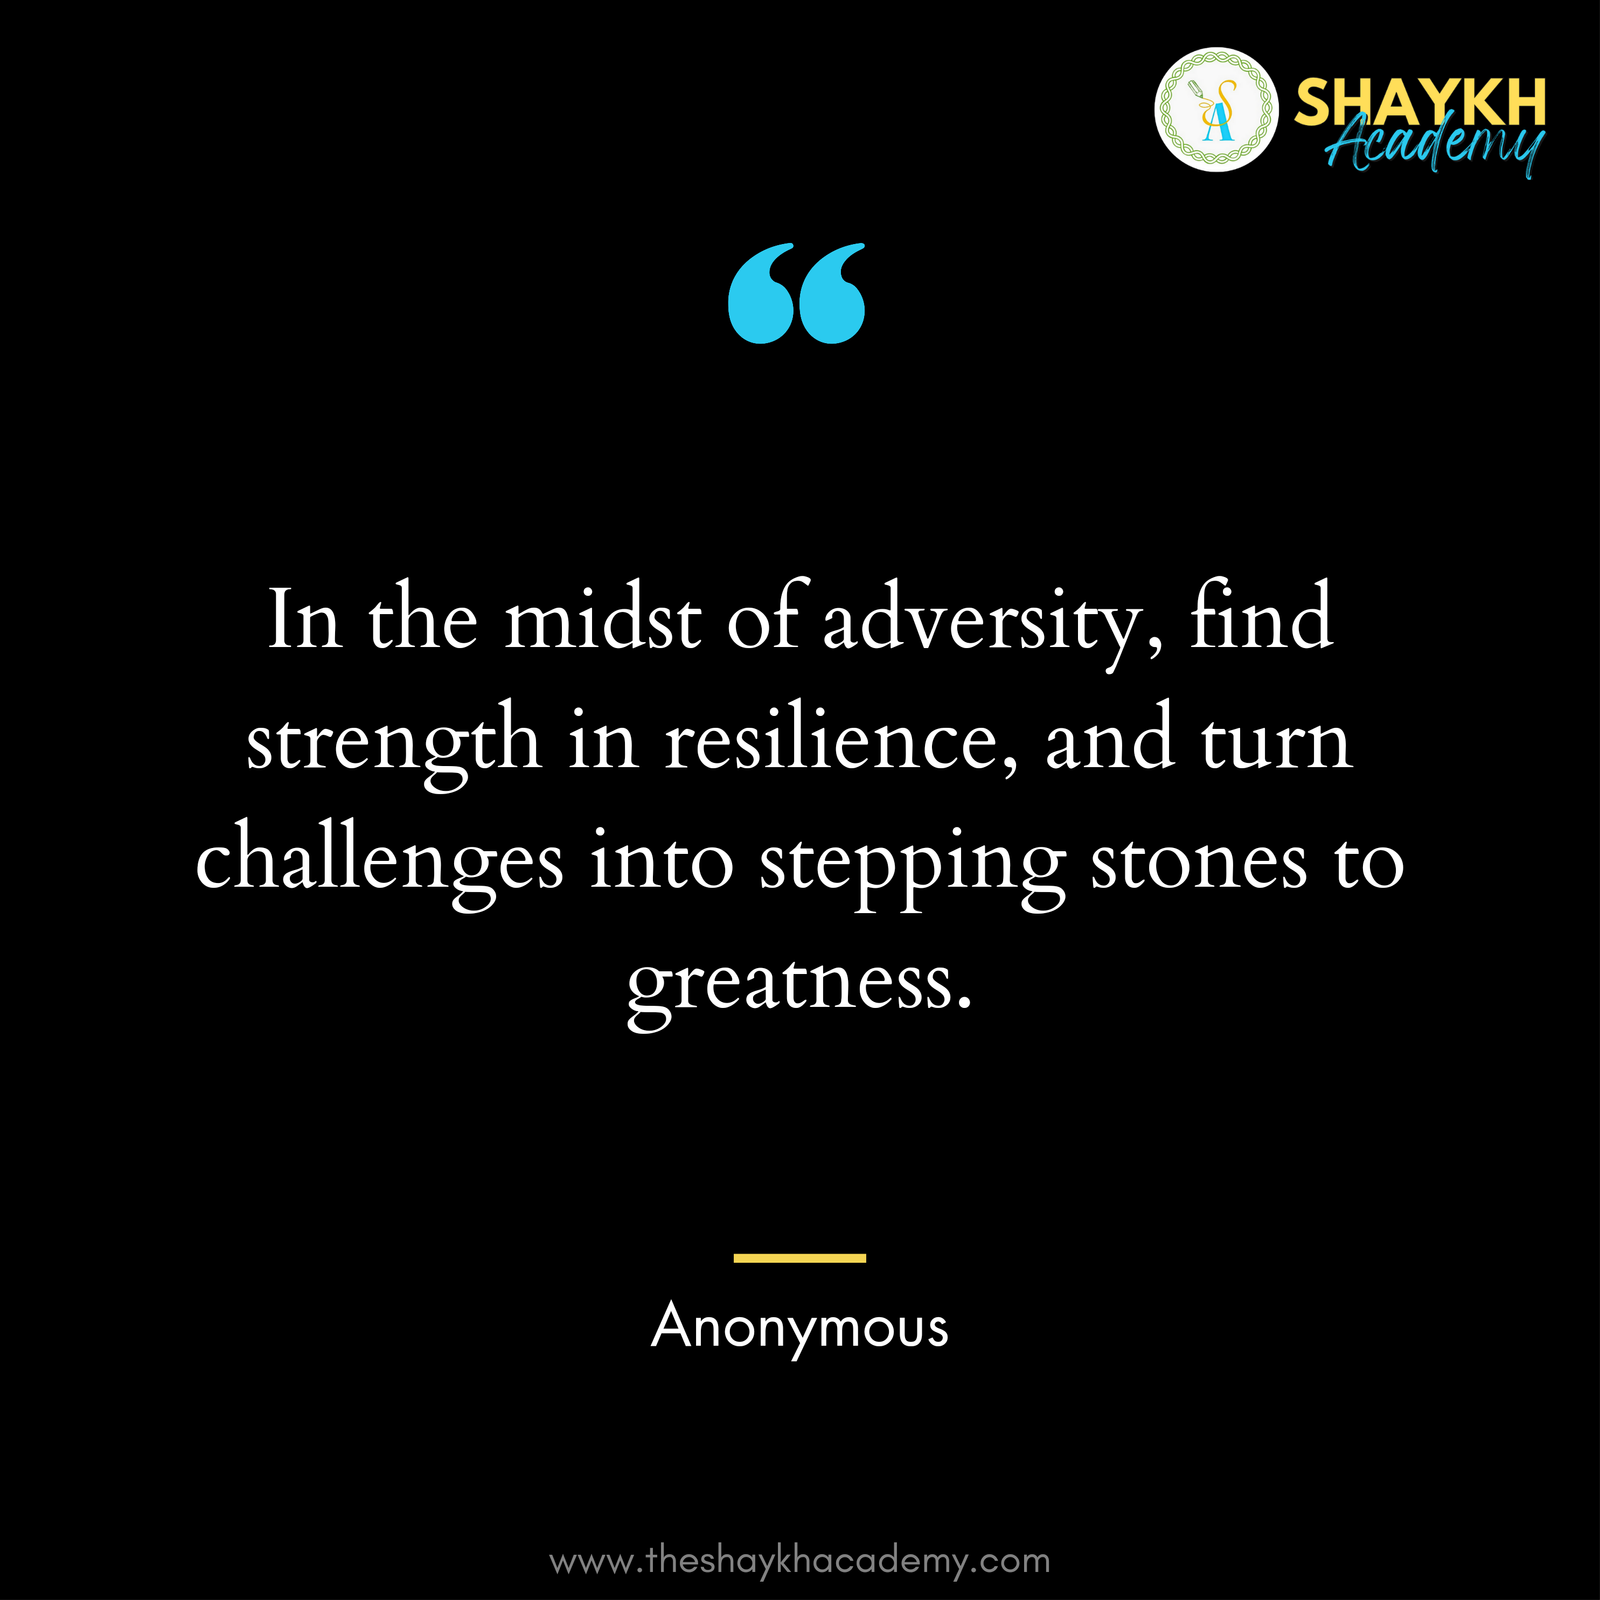 In the midst of adversity, find strength in resilience, and turn challenges into stepping stones to greatness.